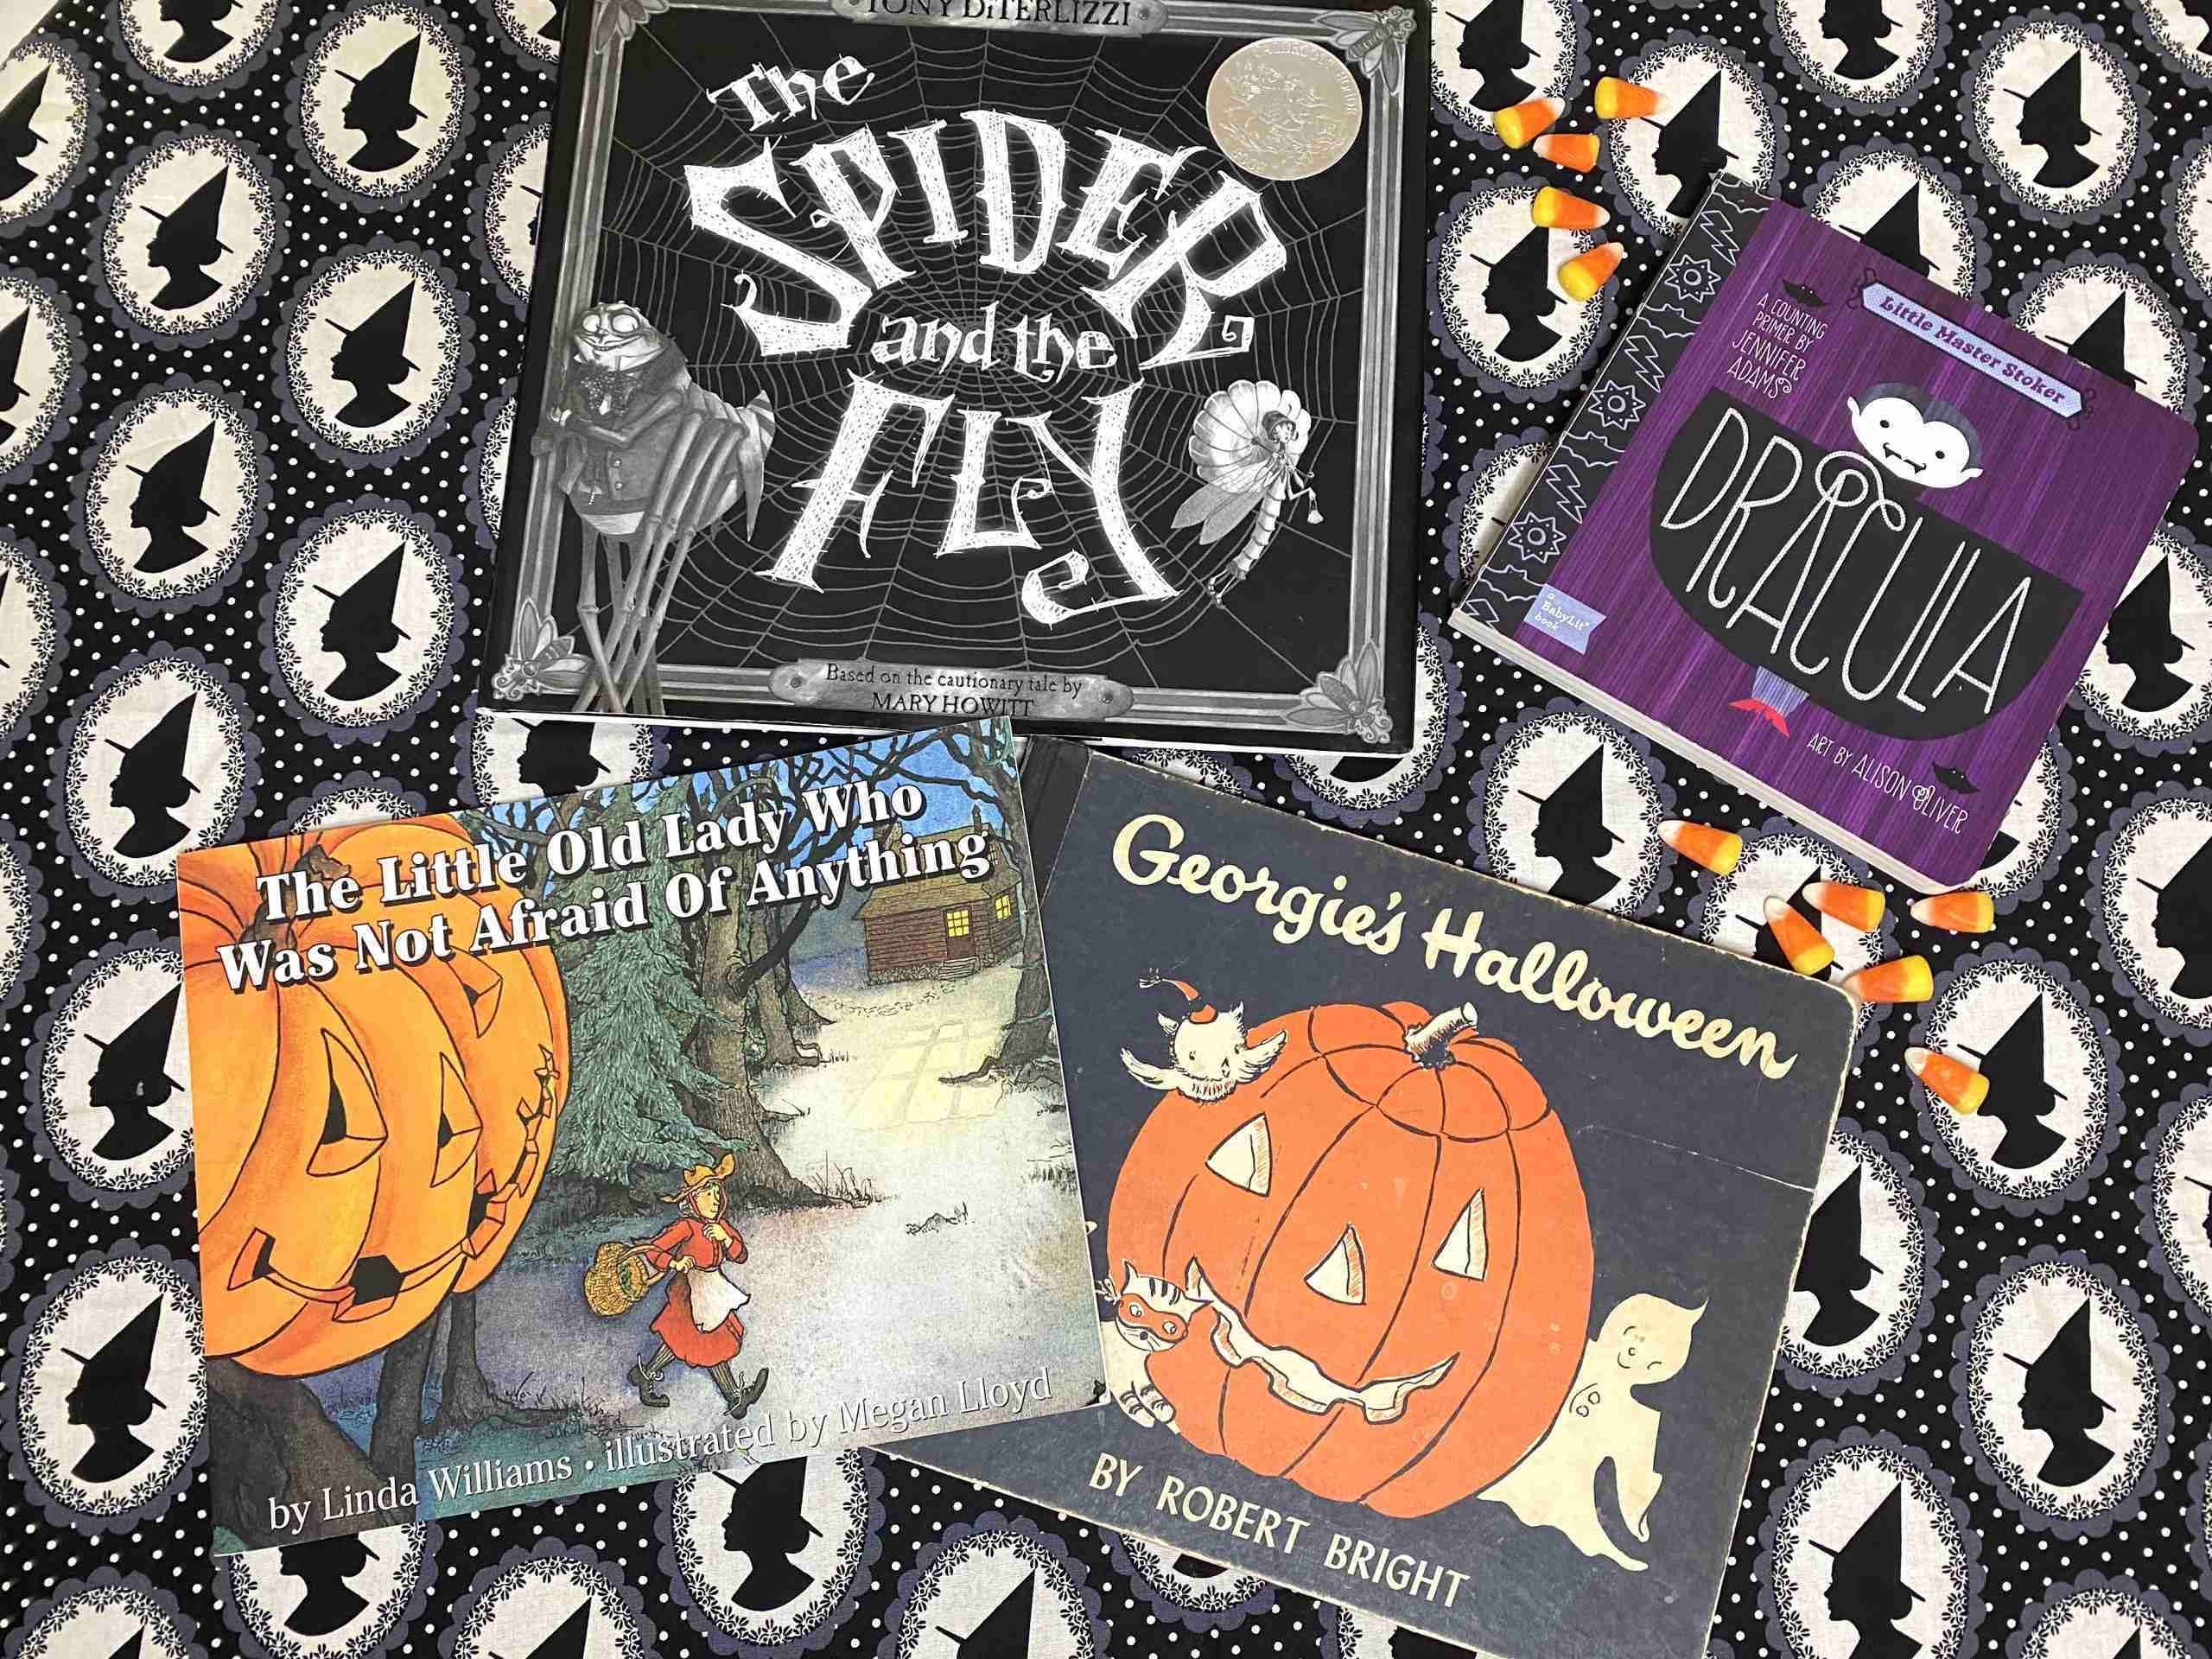 The Little Old Lady Who Was Not Afraid of Anything halloween paperback book, the spider and the fly book, mary howitt poem, tony diterlizzi illustrator, black and white witch fabric, candy corn, halloween books, georgie's halloween book, vintage books, vintage halloween book, babylit dracula book, witch hat fabric witch silhouette fabric, halloween books for kids